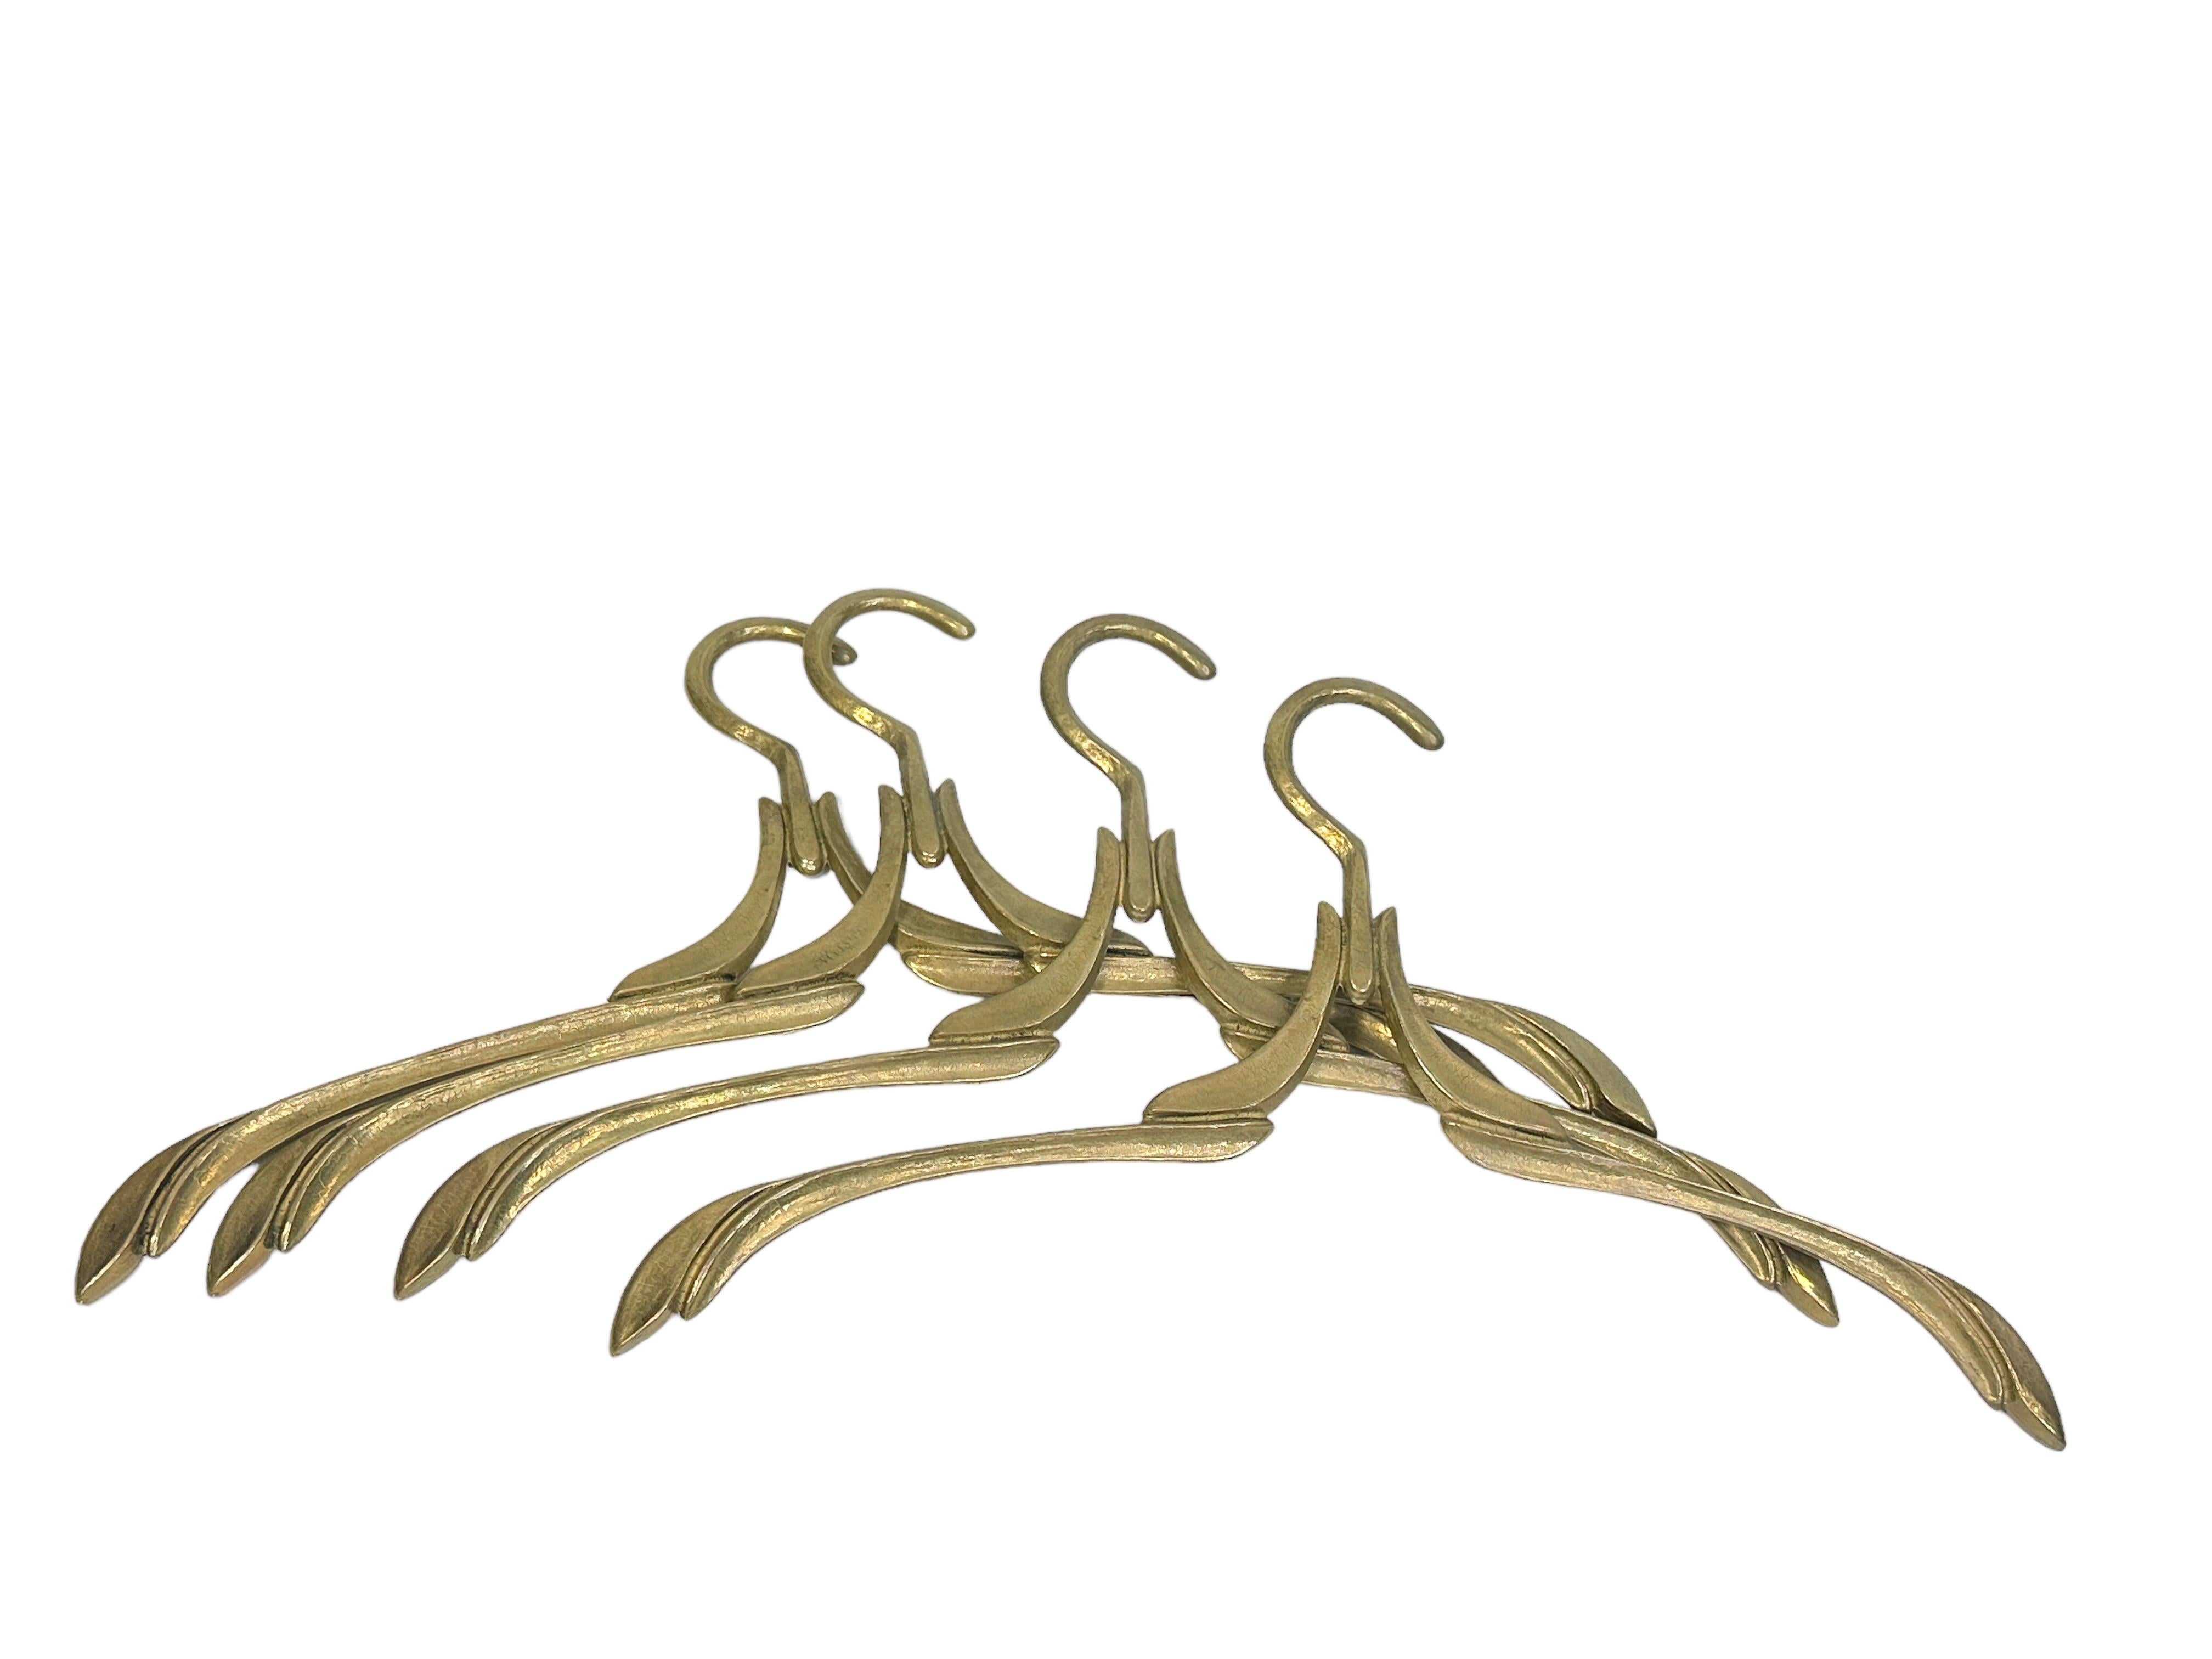 A set of four beautiful vintage hangers made of solid brass with a lovely patina.
A very special dress deserves a very special hanger. Made of solid brass, these vintage hangers are in very good condition. The perfect addition to your boudoir or